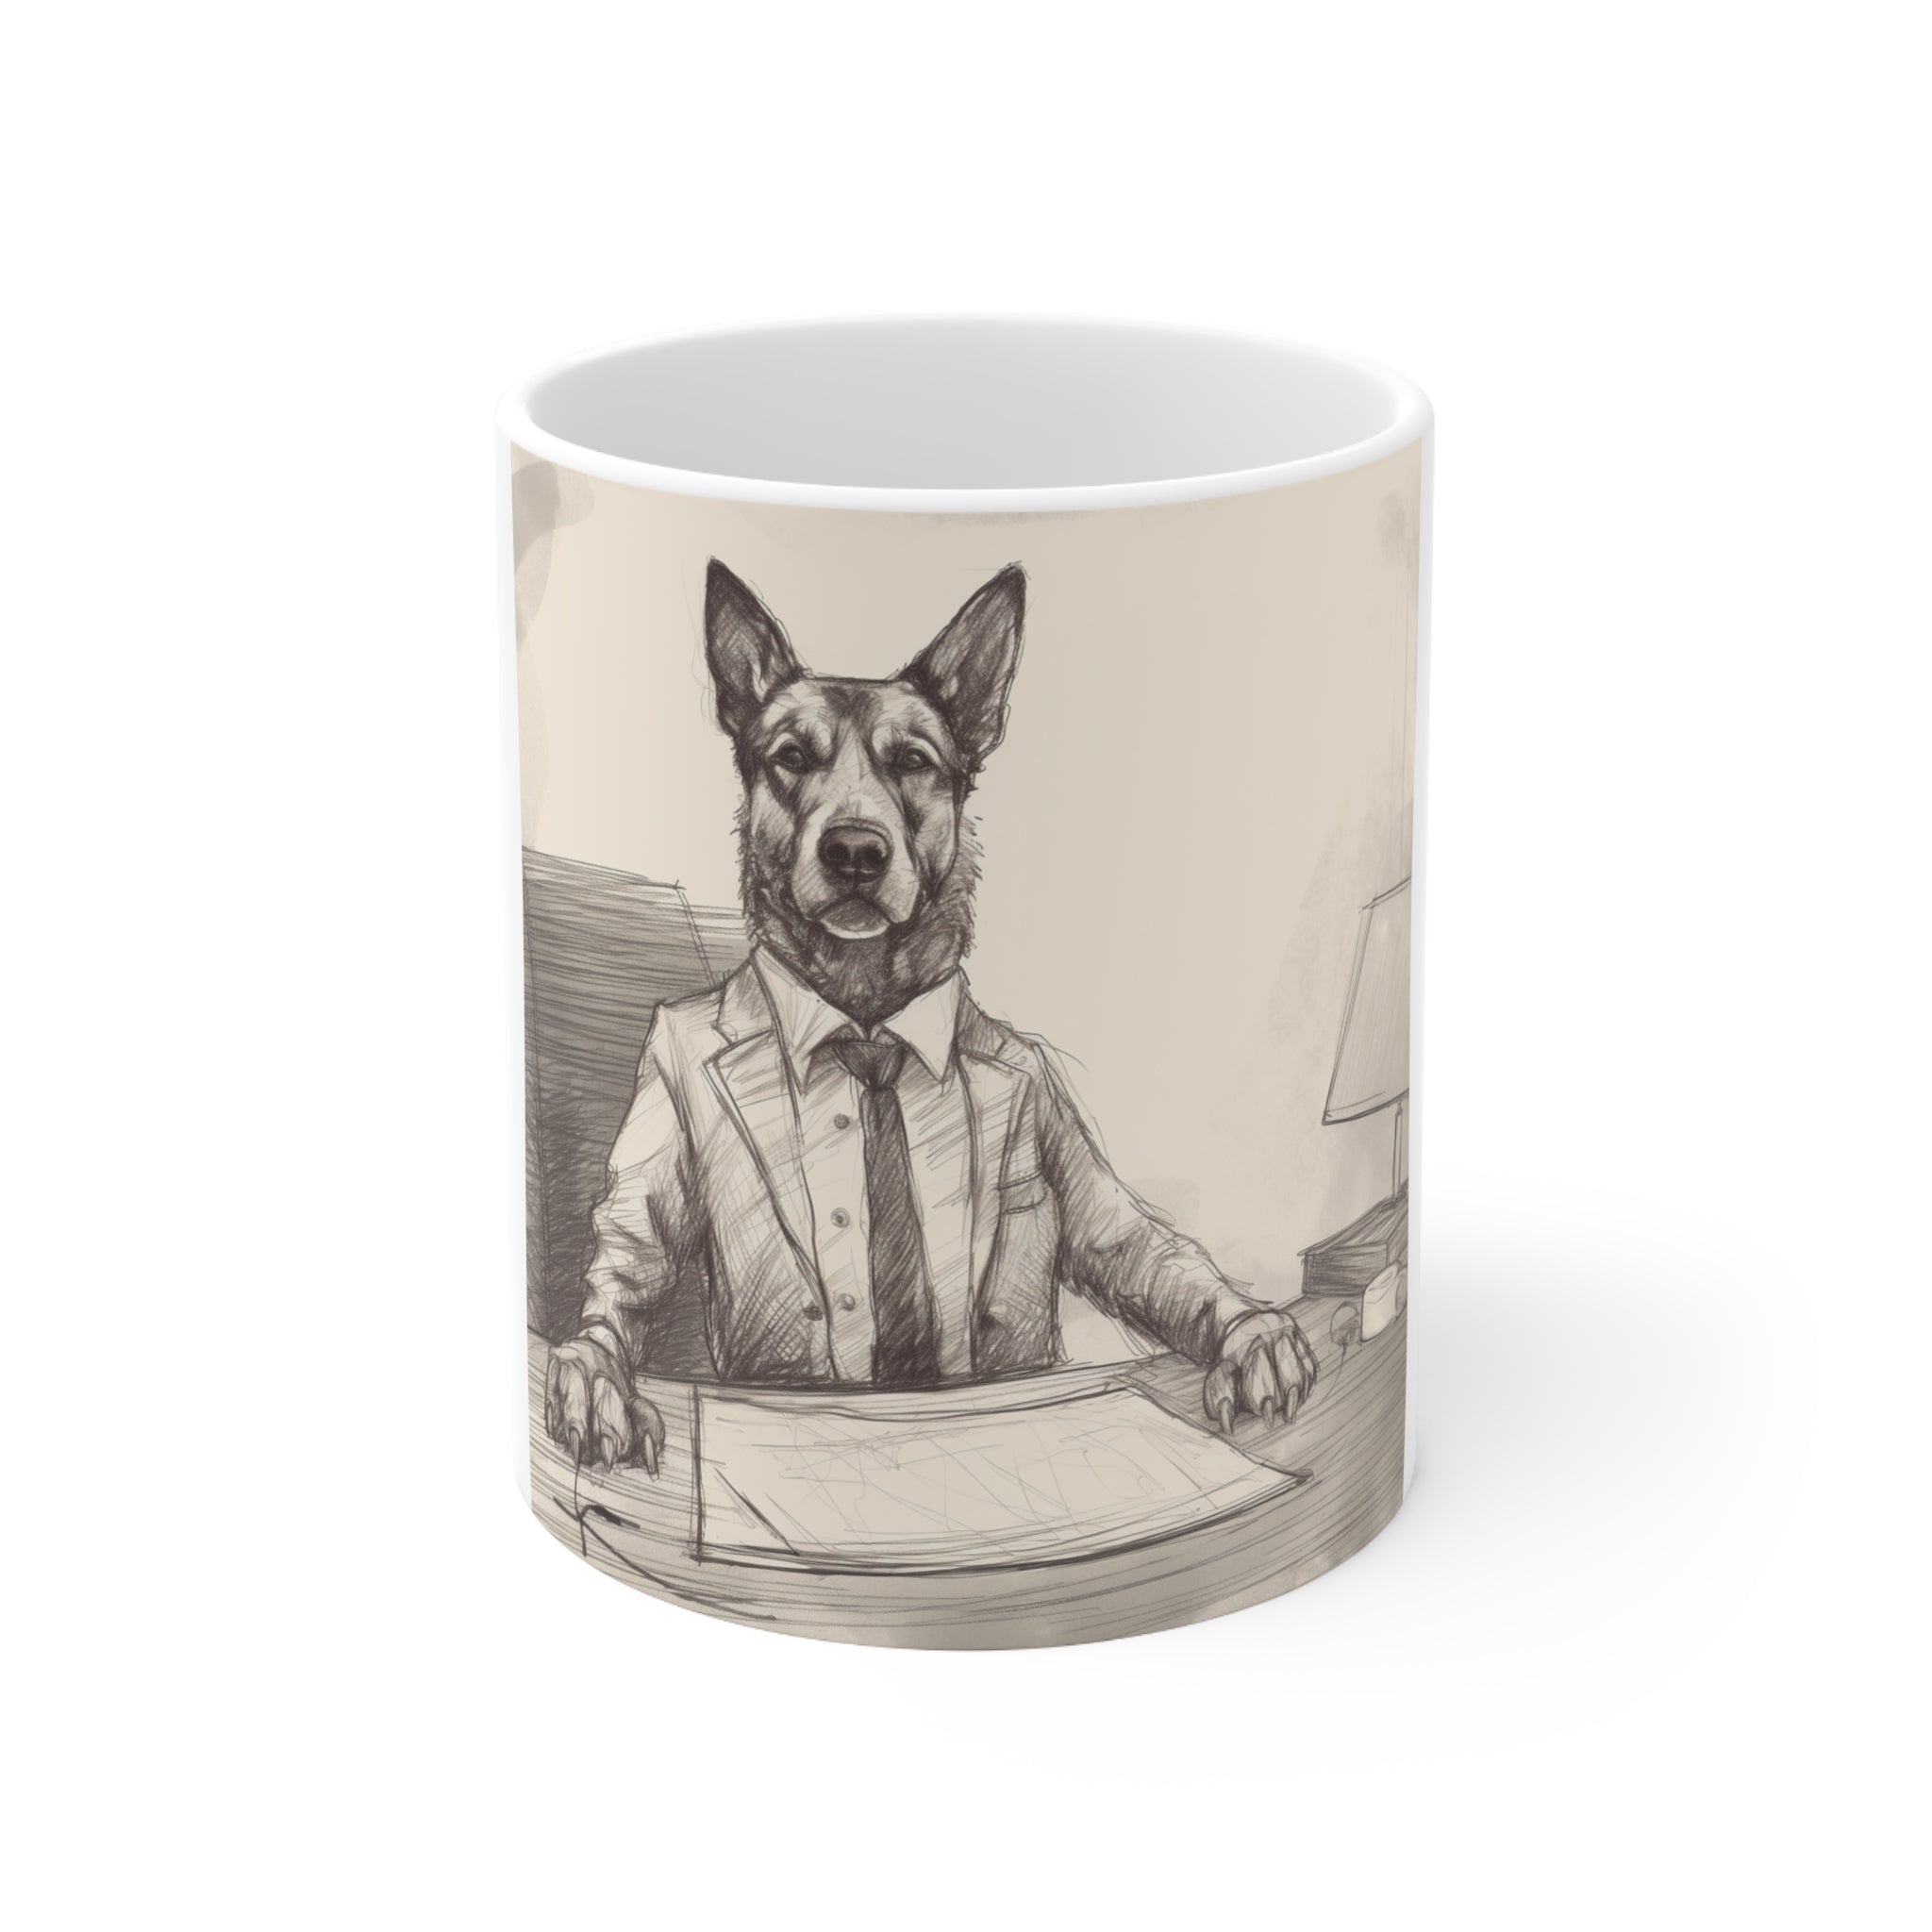 🐶 Manager Doggy Ceramic Mug 11oz - Cute Puppy Boss Coffee Cup for the Ultimate Office Manager | Adorable Desk Decor